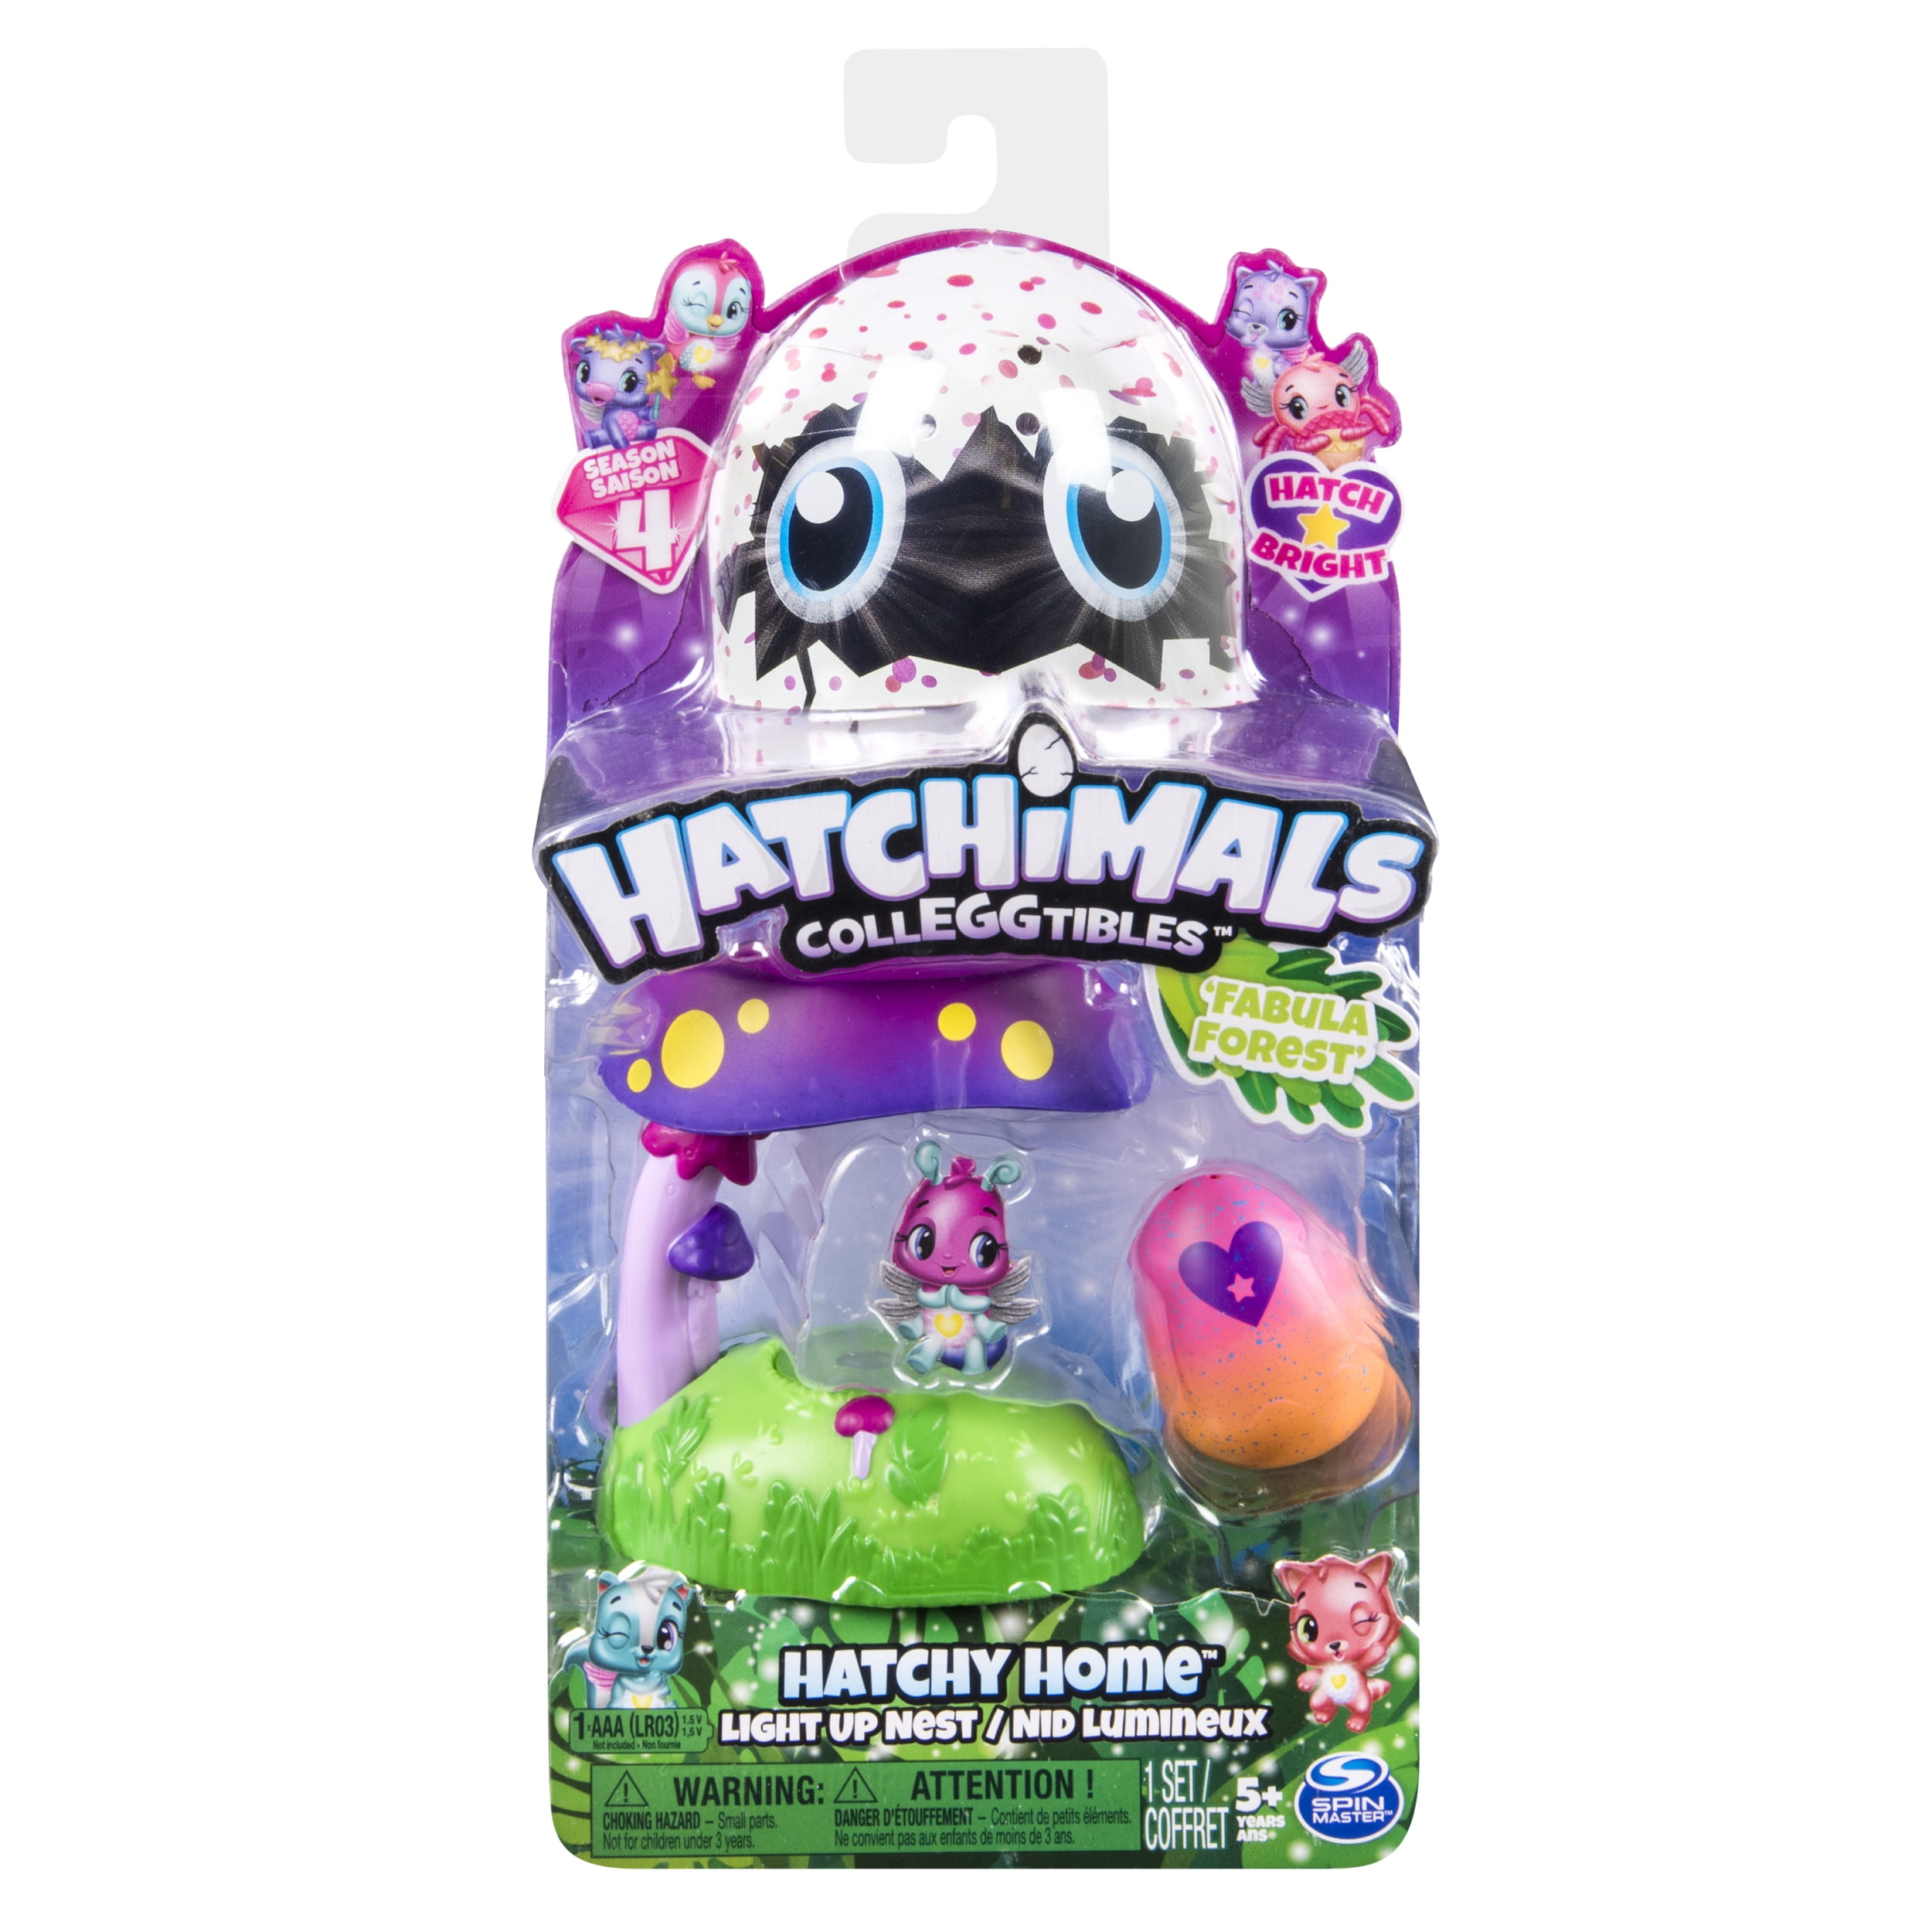 Hatchimals Fabula Forest with 2 BONUS collEGGtibles Pink/Blue 